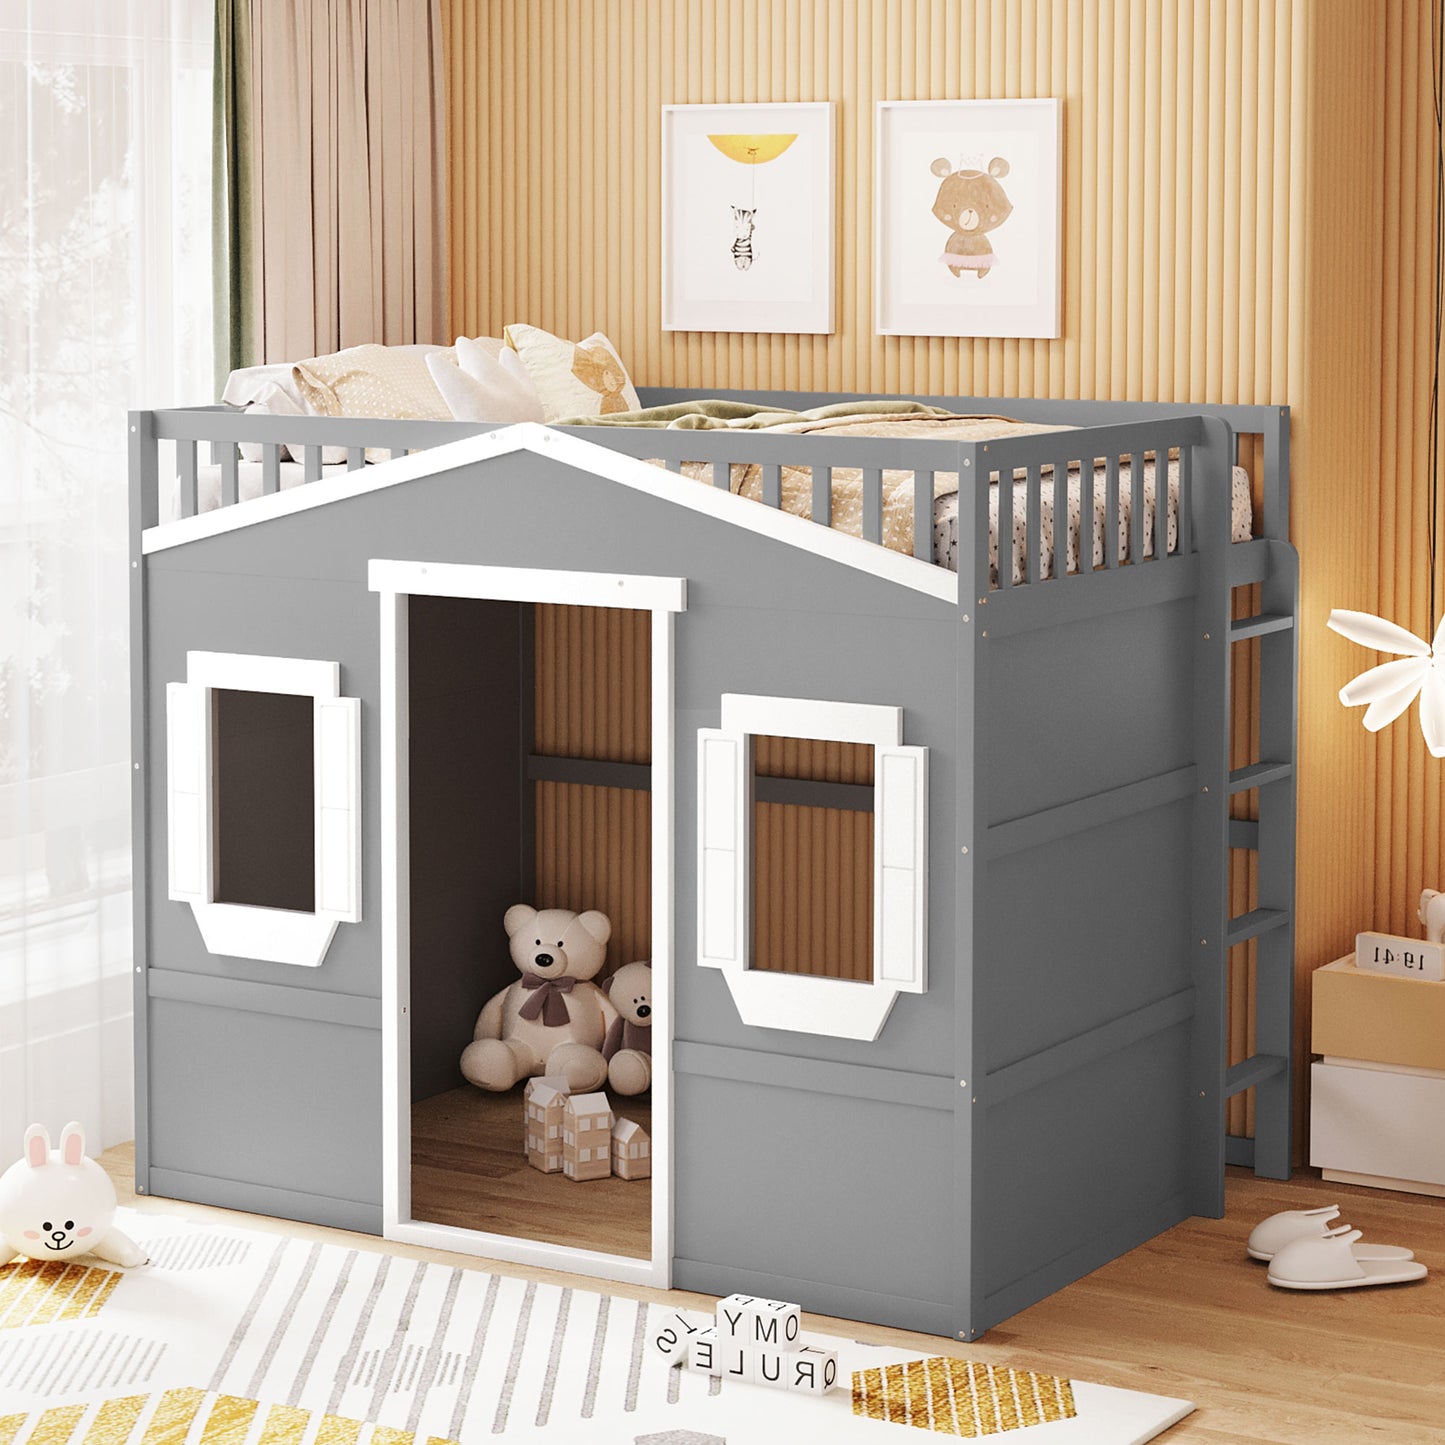 Homey Life House Loft Bed With Ladder- Gray & White